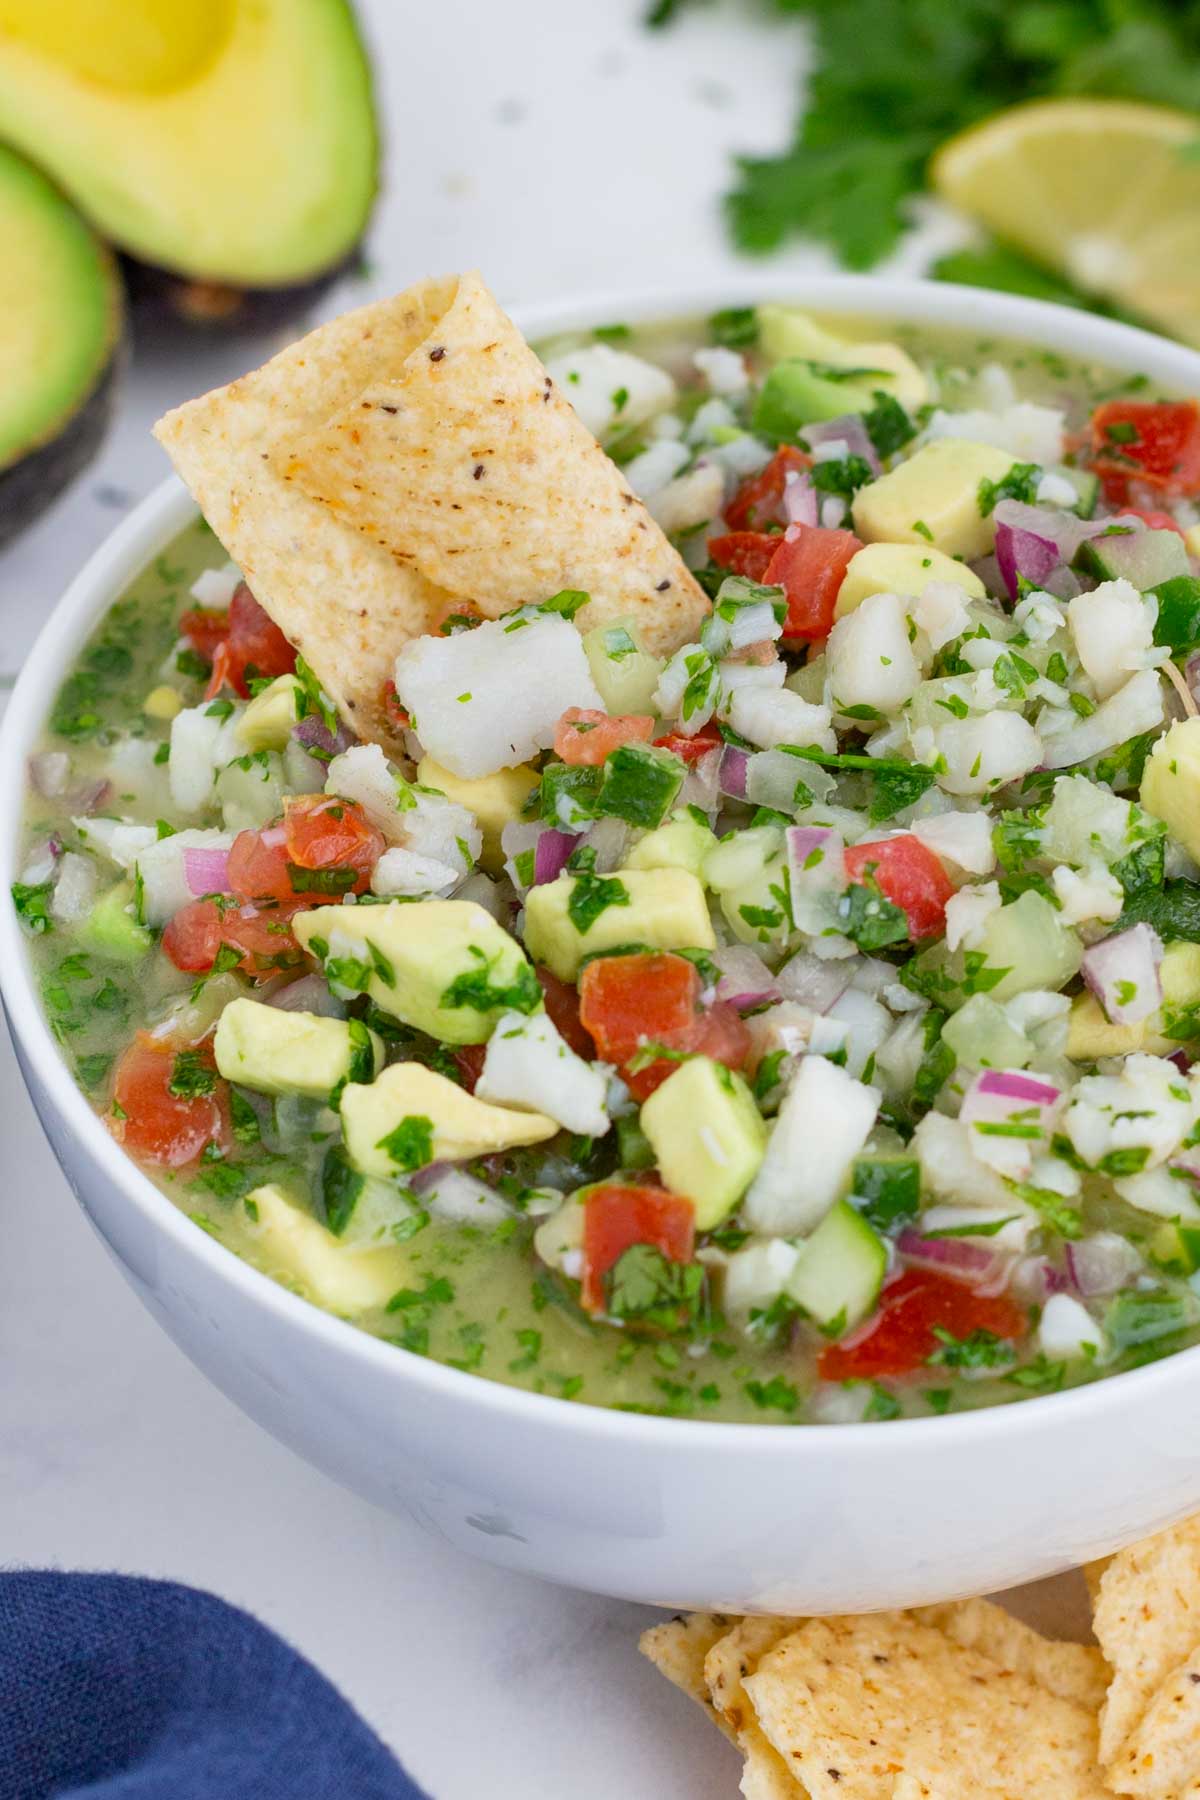 A Mexican dip made with bite-sized fish, avocado, cucumber, and tomato in a glass bowl.